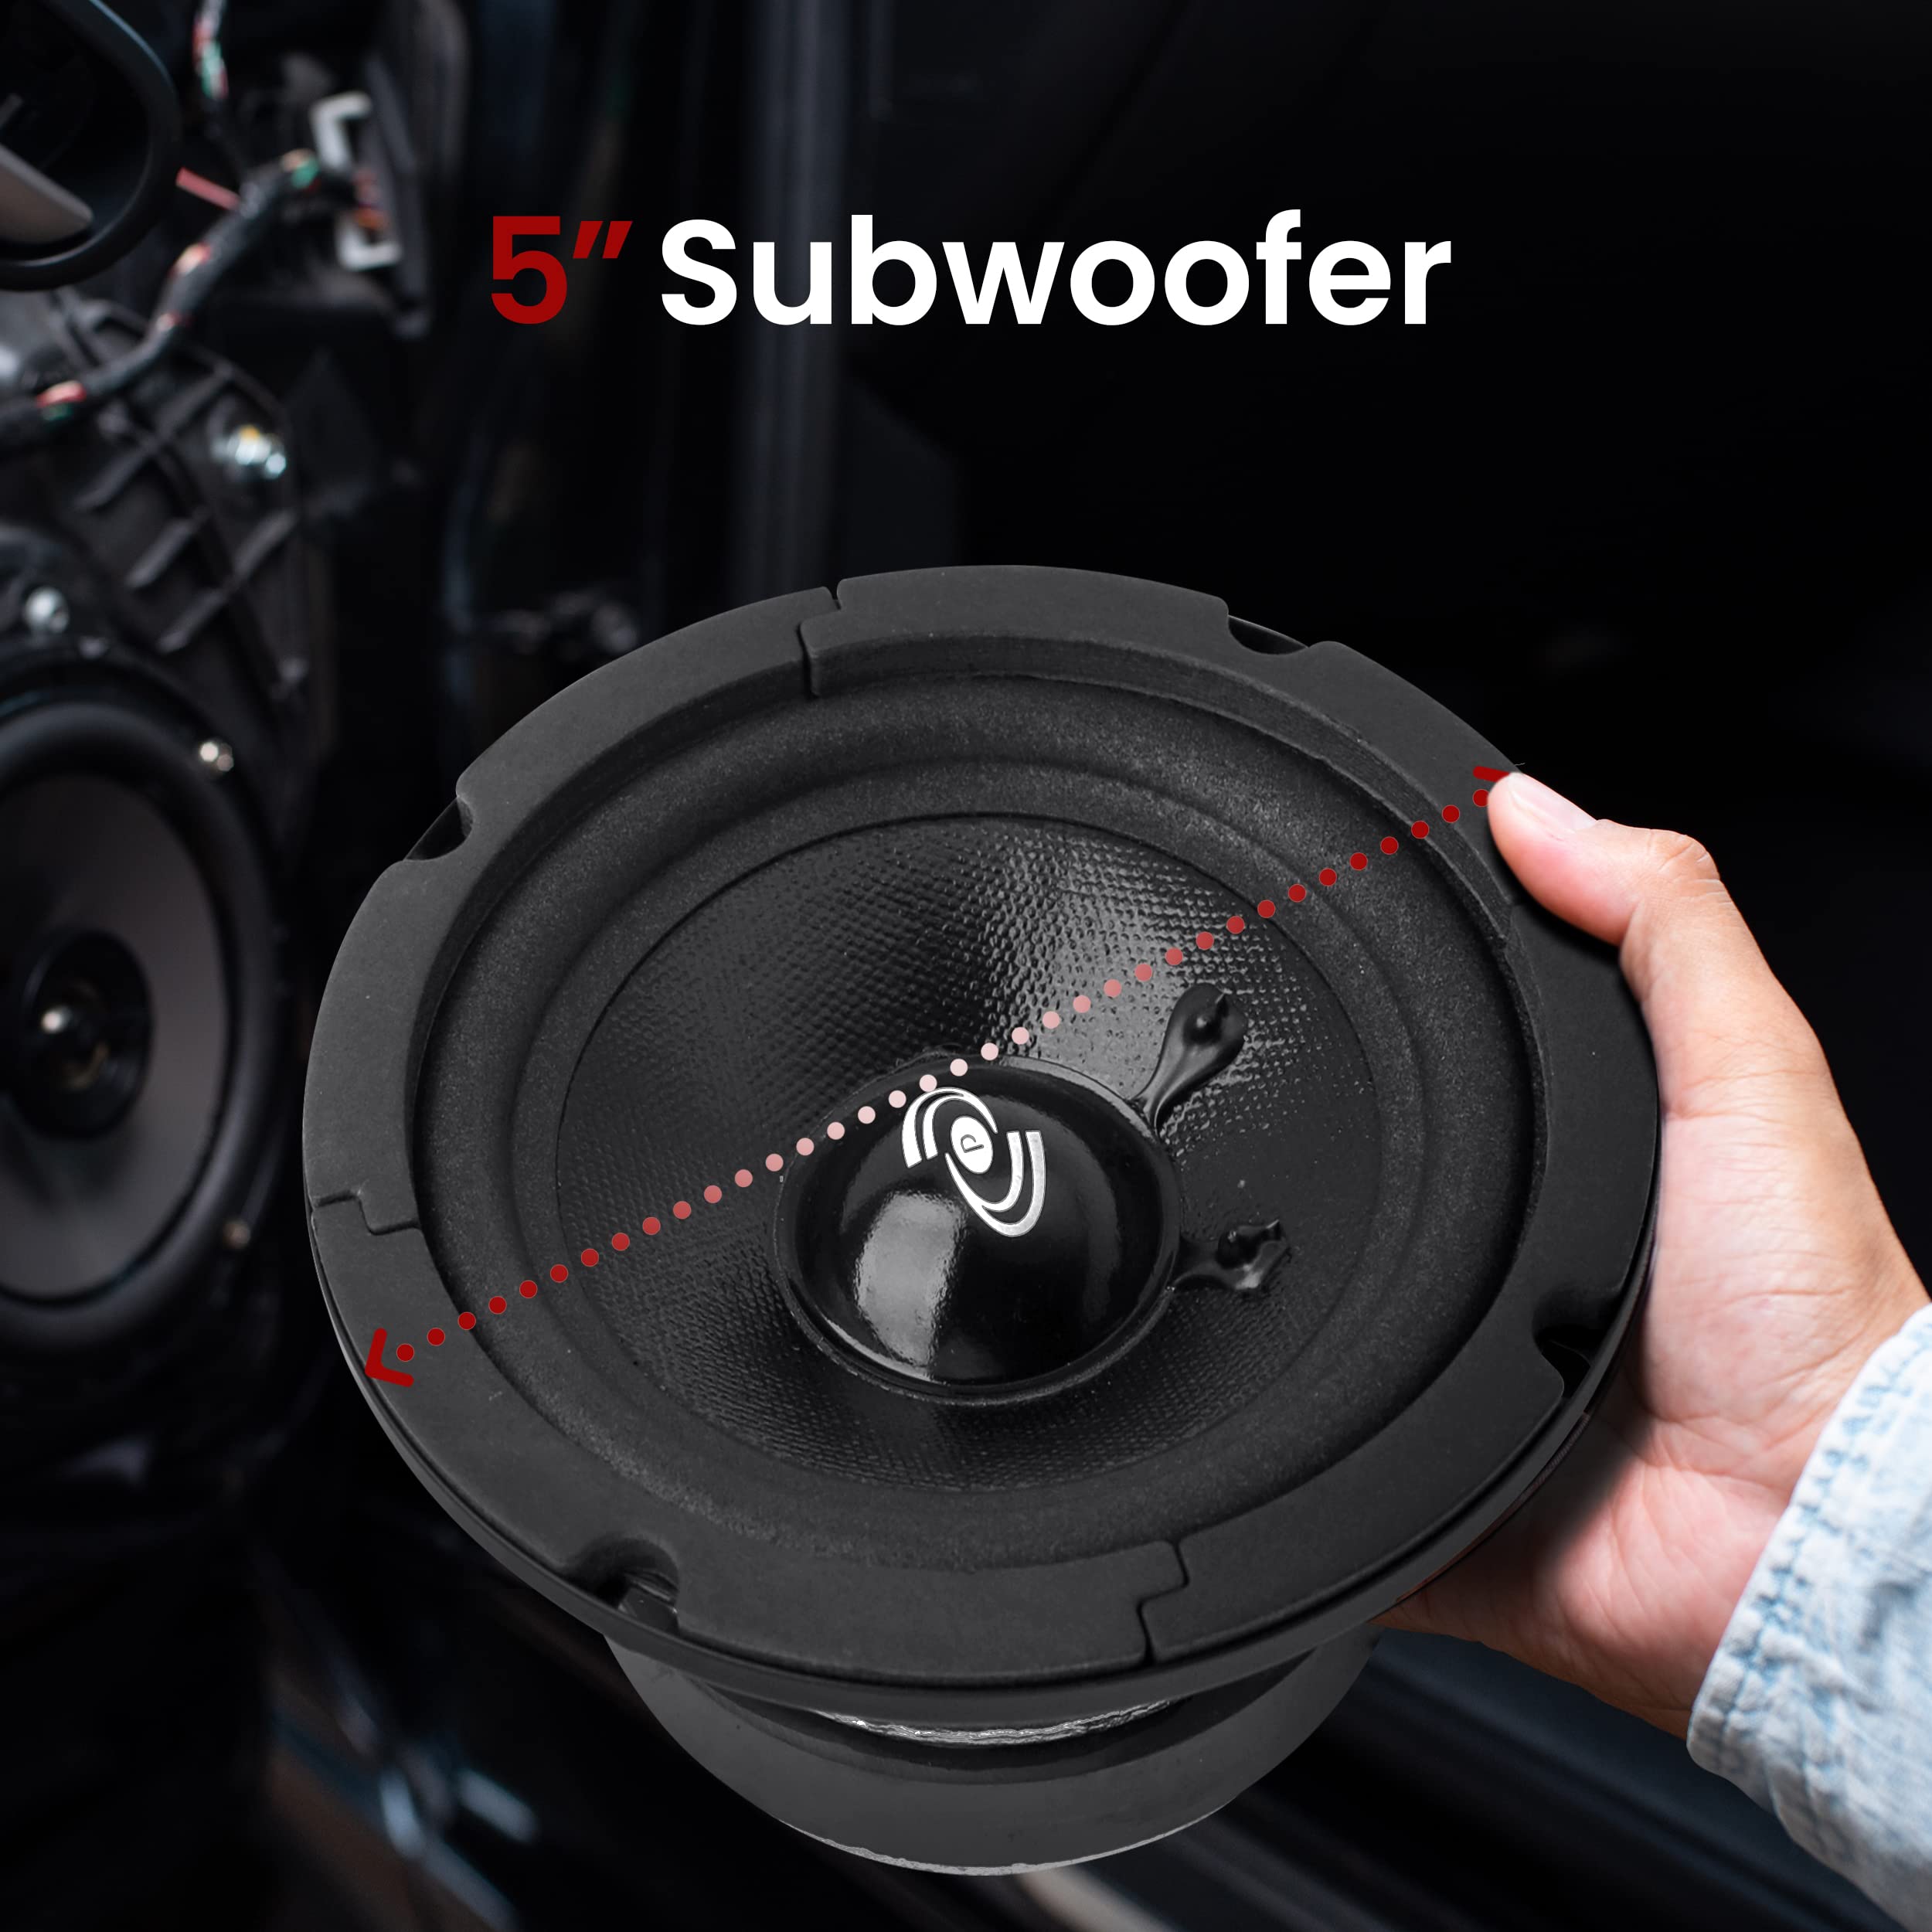 Pyle 5 Inch Woofer Driver-Upgraded 200 Watt Peak High Performance Mid-Bass Mid-Range Car Speaker 450Hz-7kHz Frequency Response 15 Oz Magnet Structure 8 Ohm w/ 92dB and Paper Coating Cone-PDMR5 Black